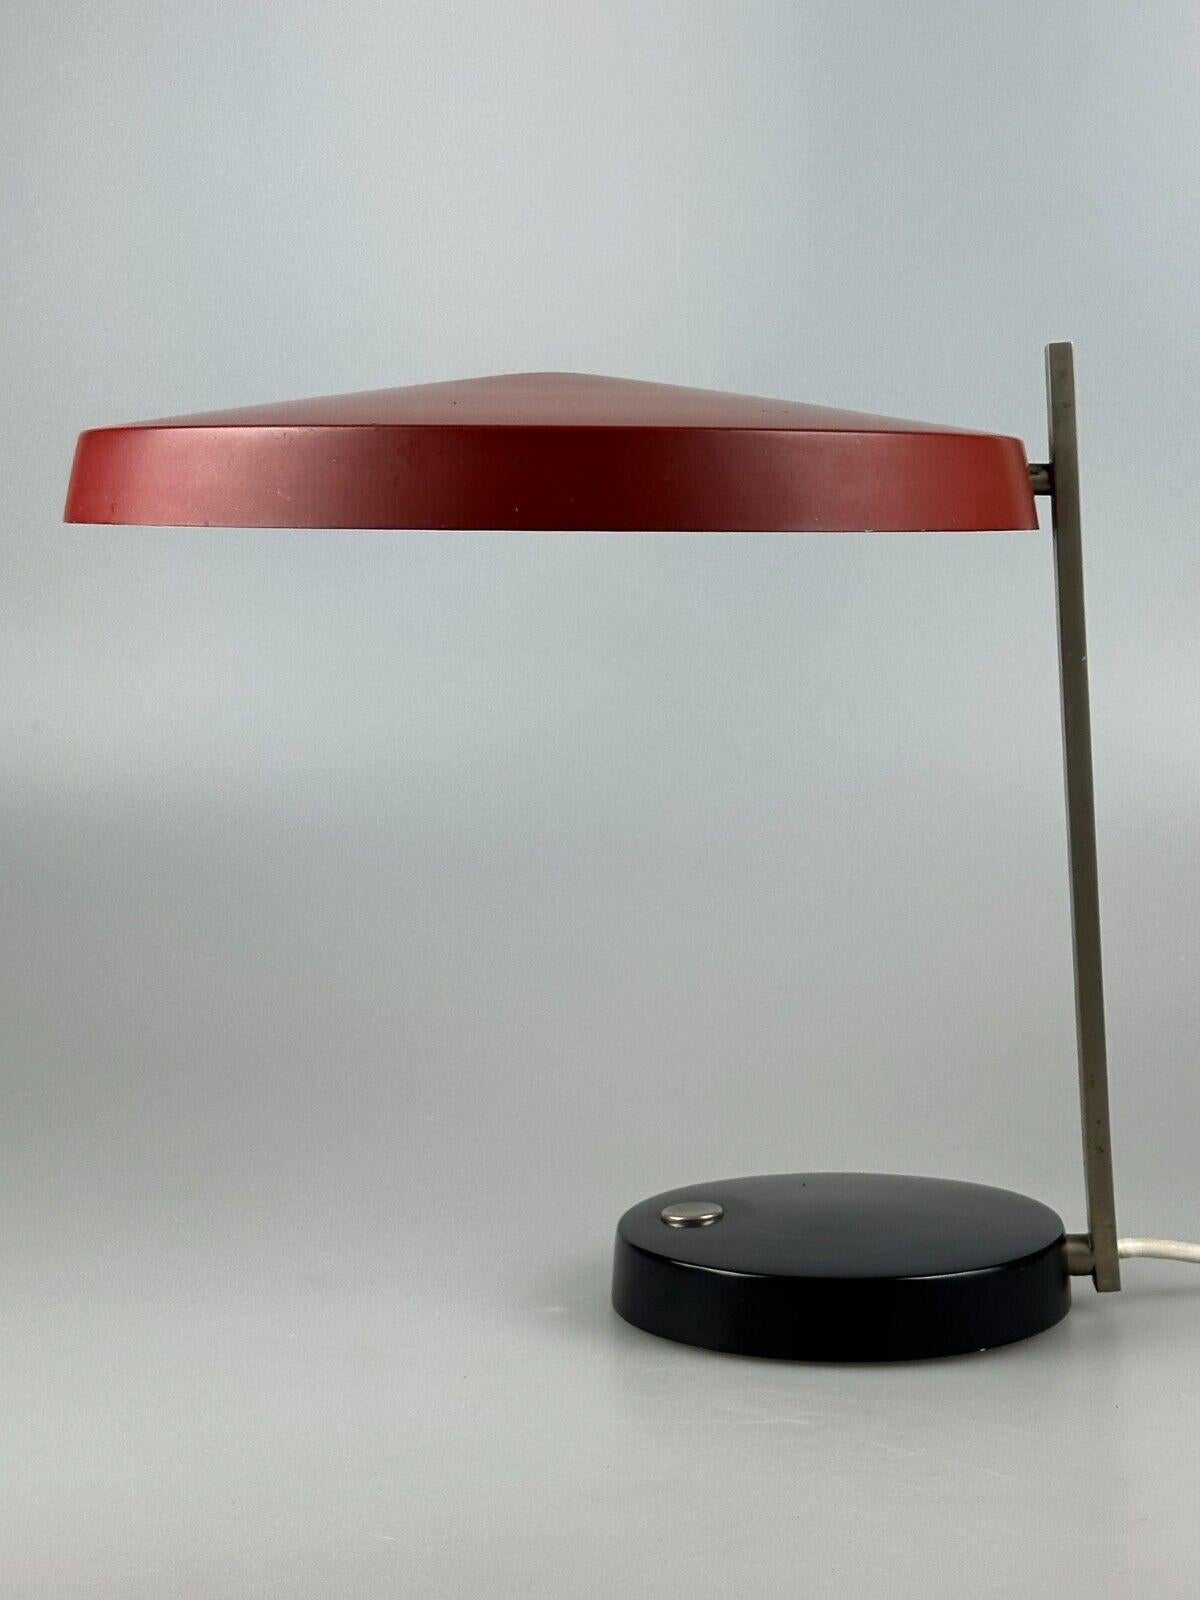 60s 70s table lamp desk lamp by Heinz Pfänder for Hillebrand For Sale 4